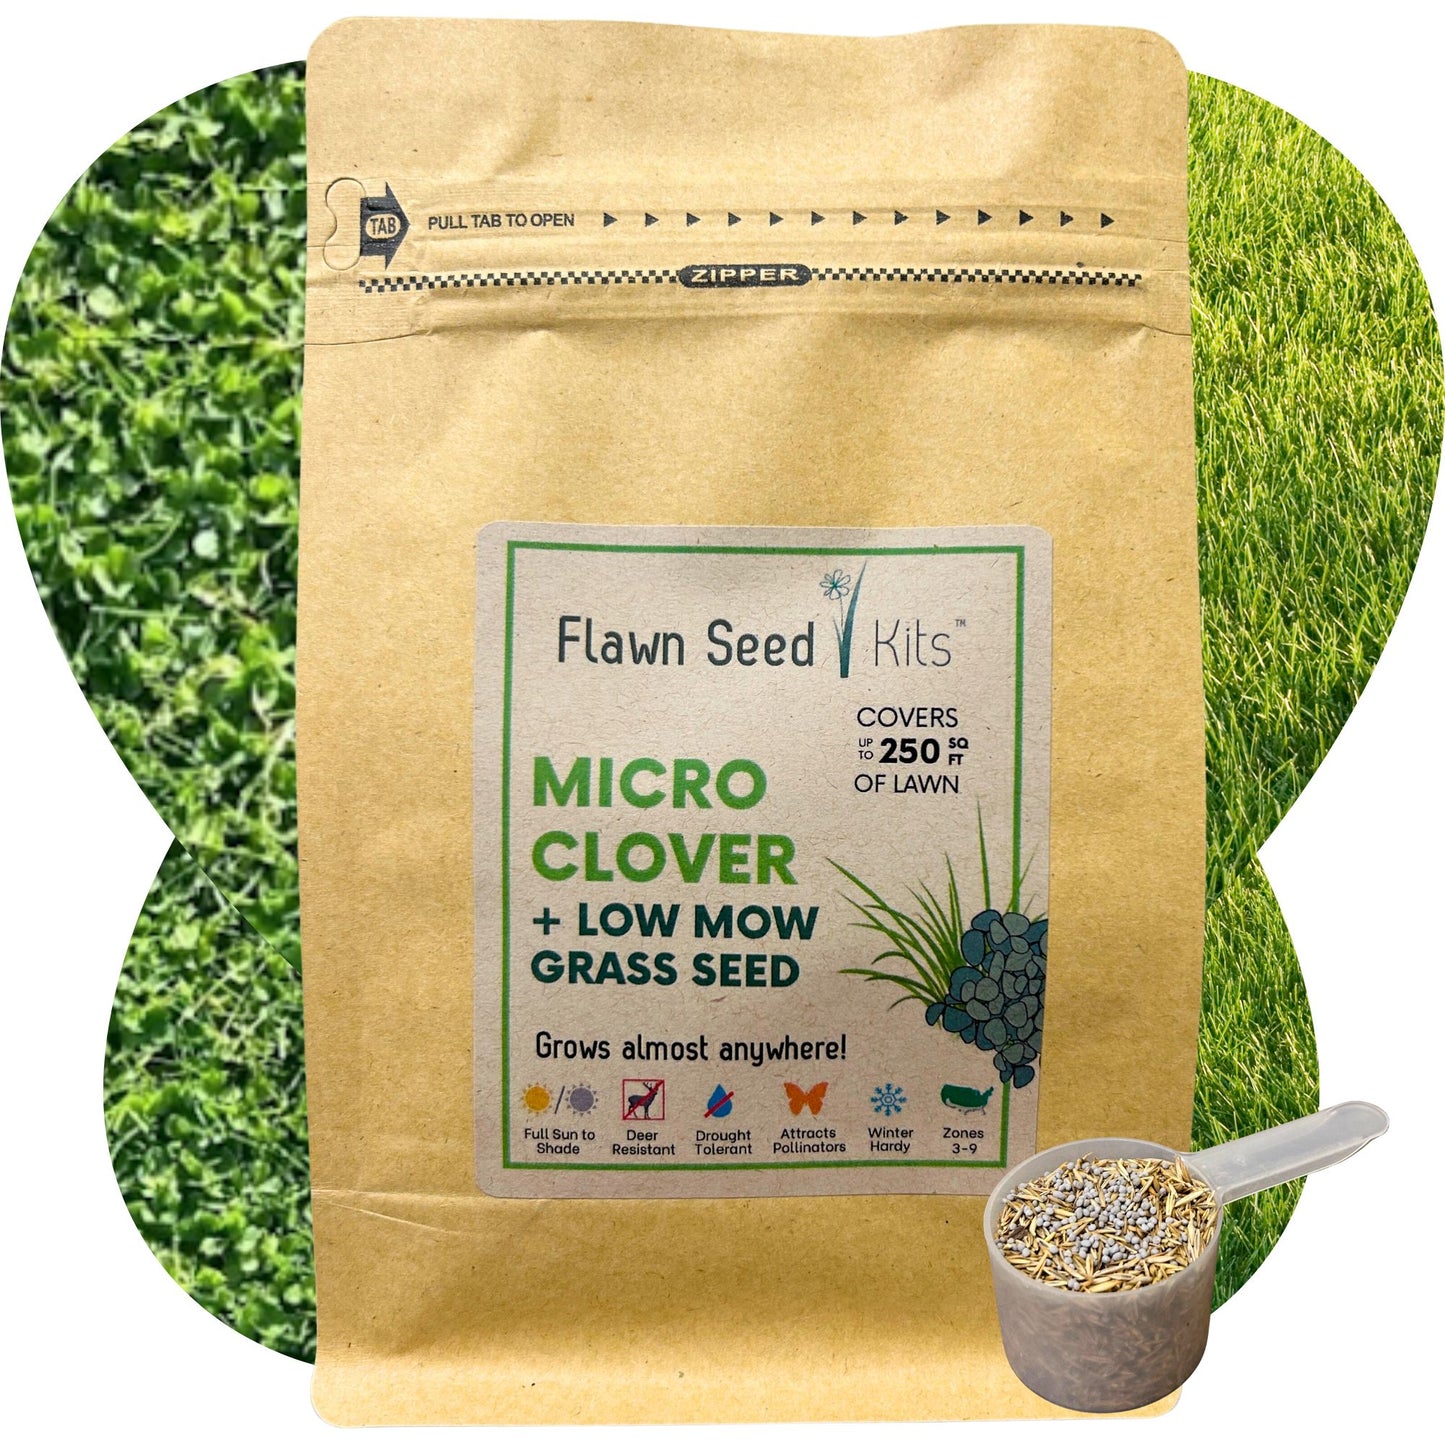 Micro Clover + Low Mow Grass Seed Pouch